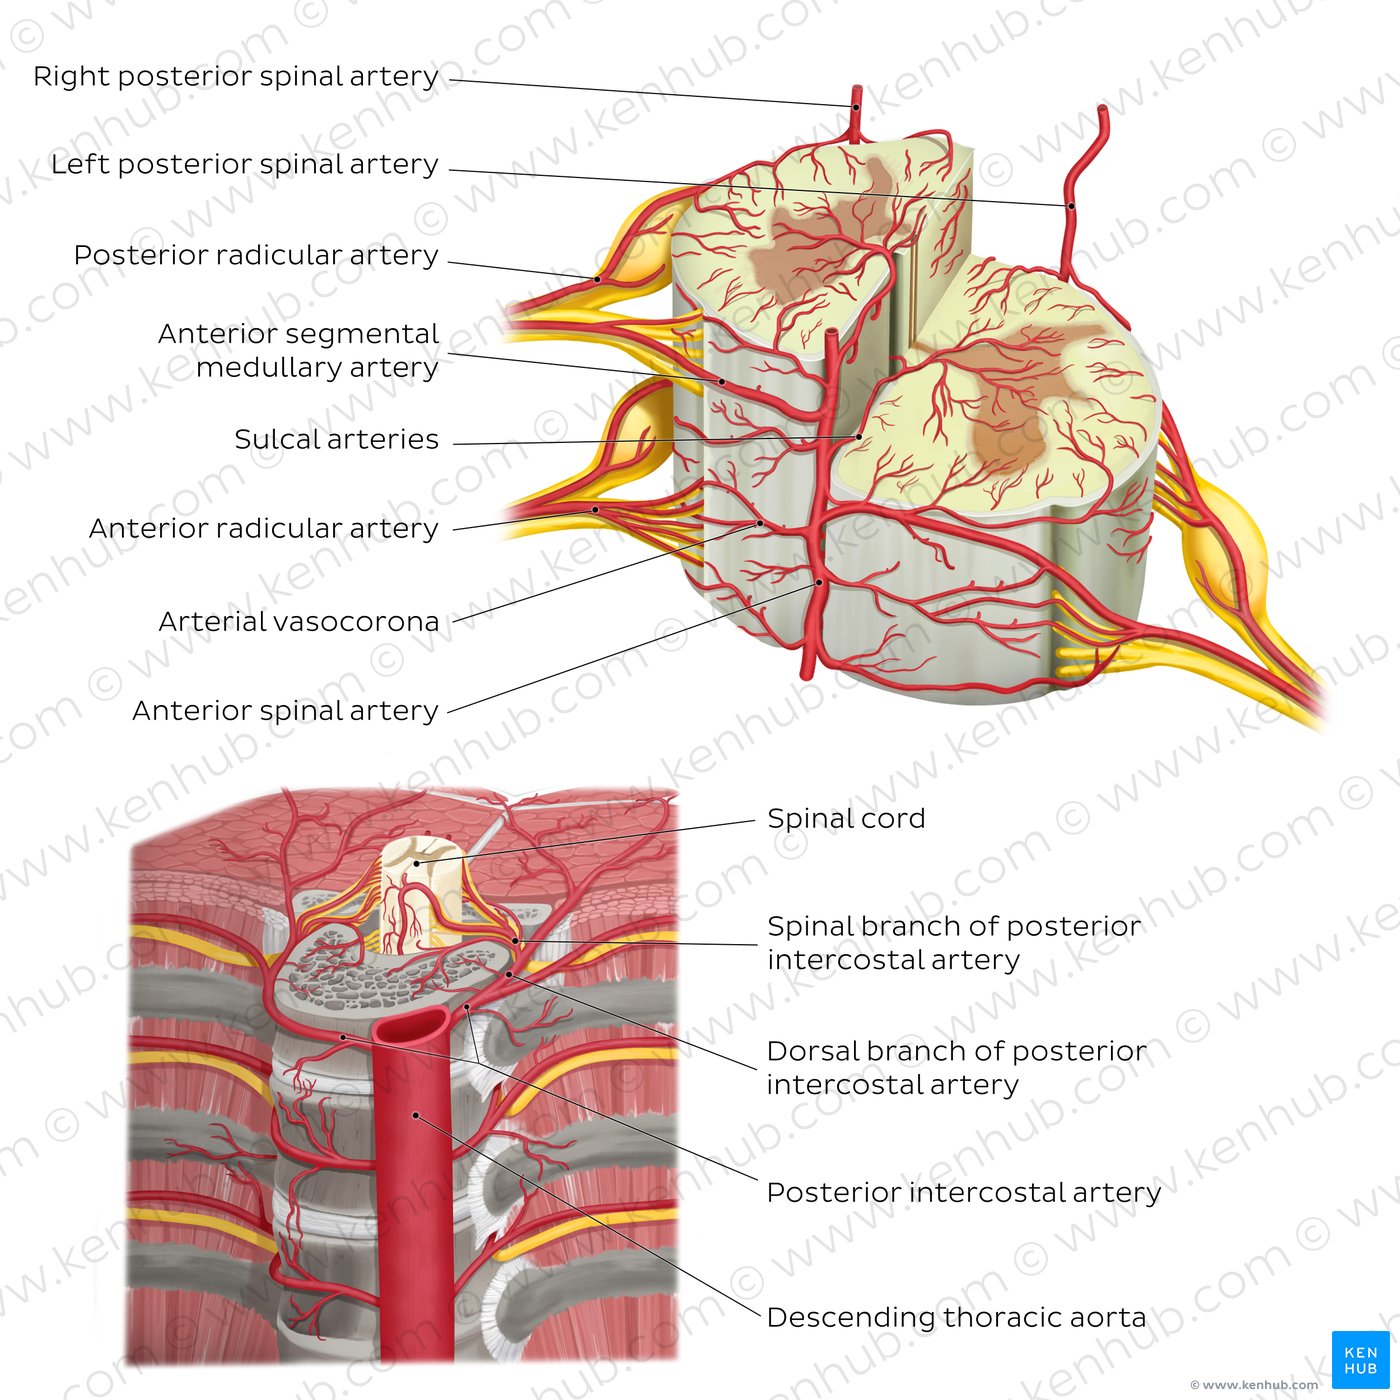 Arteries of the spinal cord